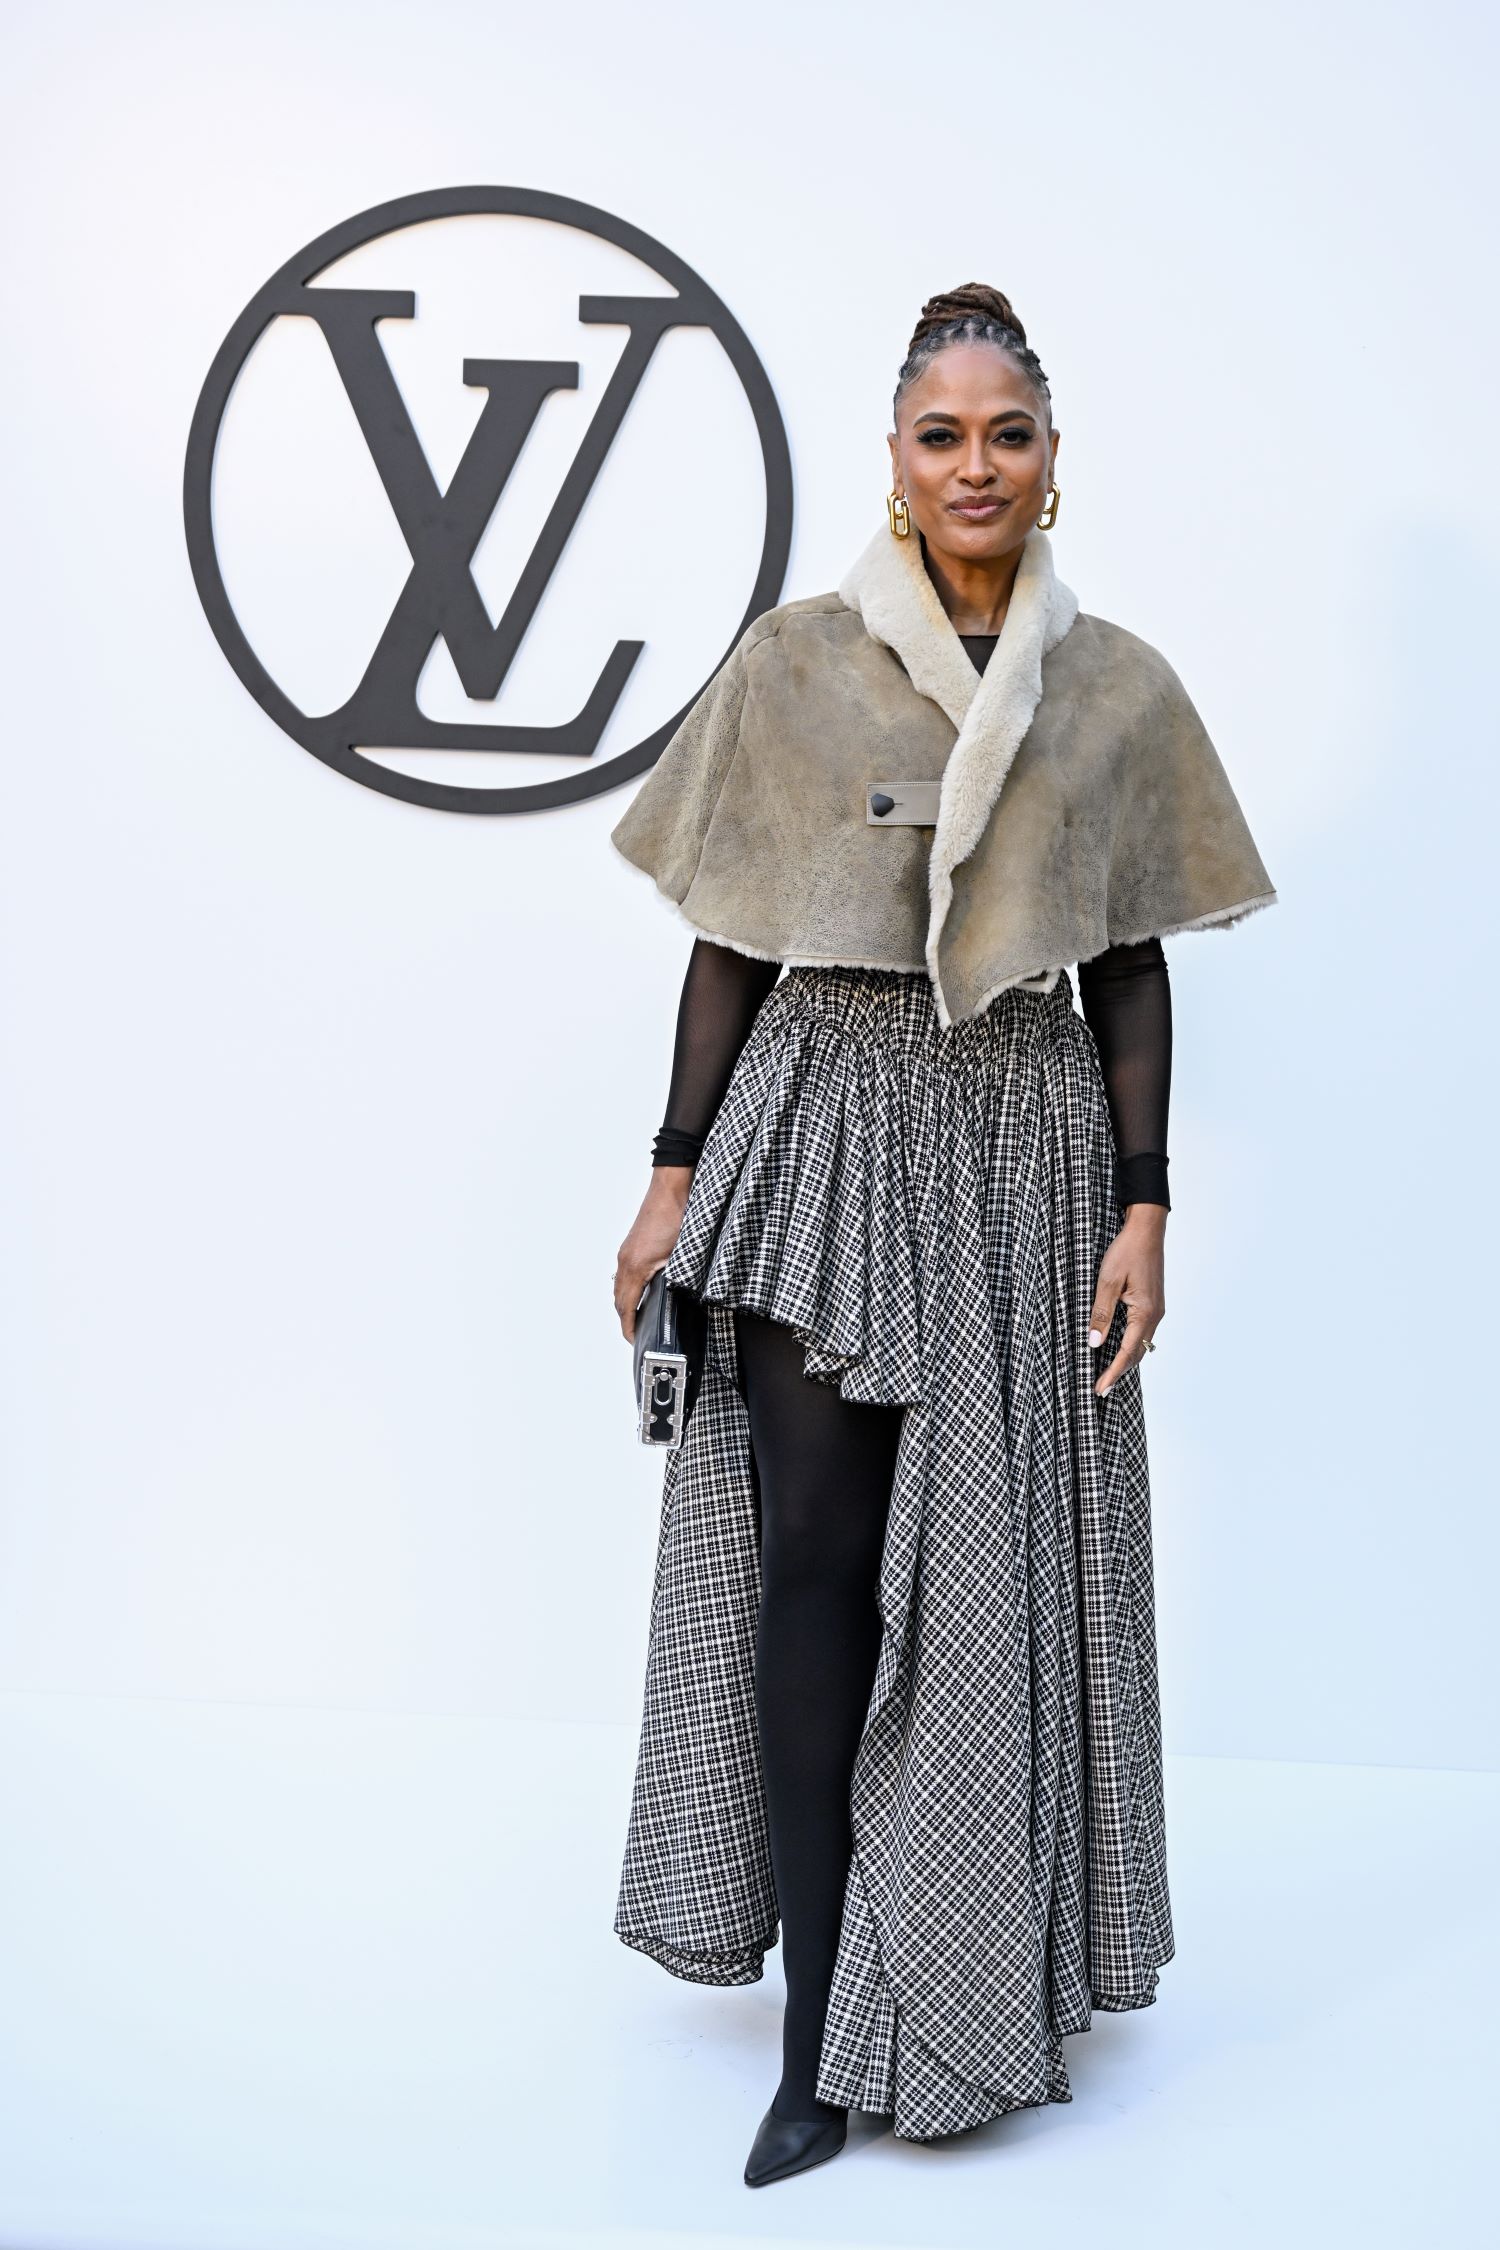 AVA DUVERNAY attending the Cruise 2025 Fashion Show by Louis Vuitton in Barcelona | CRUISE 2025 FASHION SHOW COLLECTION © Louis Vuitton – All rights reserved | Courtesy of Gnazzo Group.